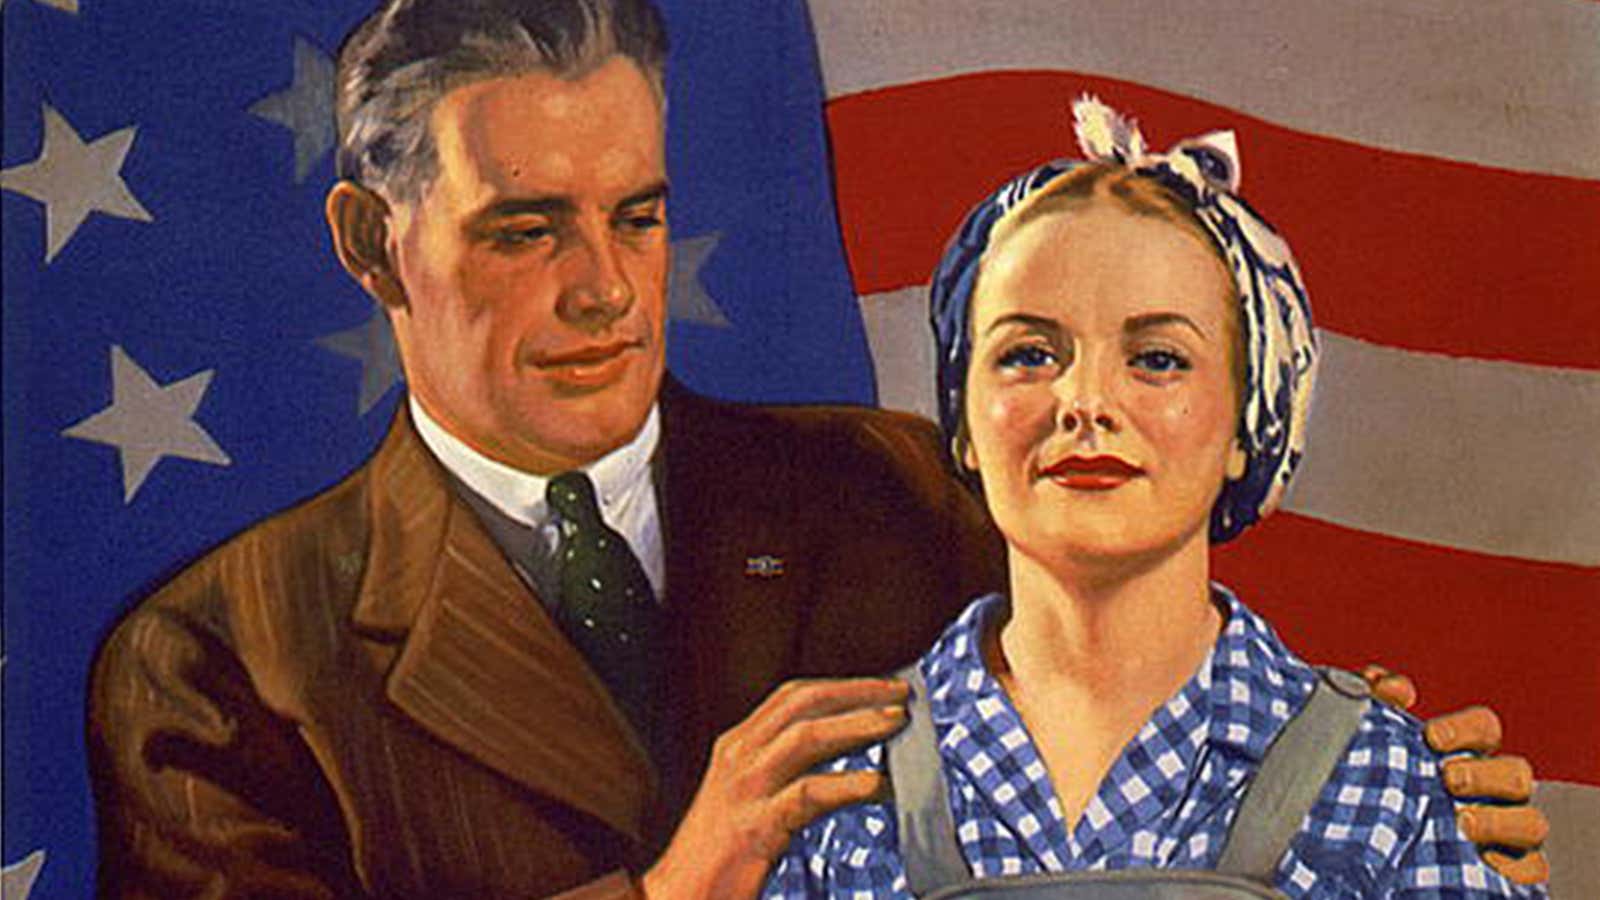 Patronizing WWII posters show how extraordinary Rosie the Riveter really was